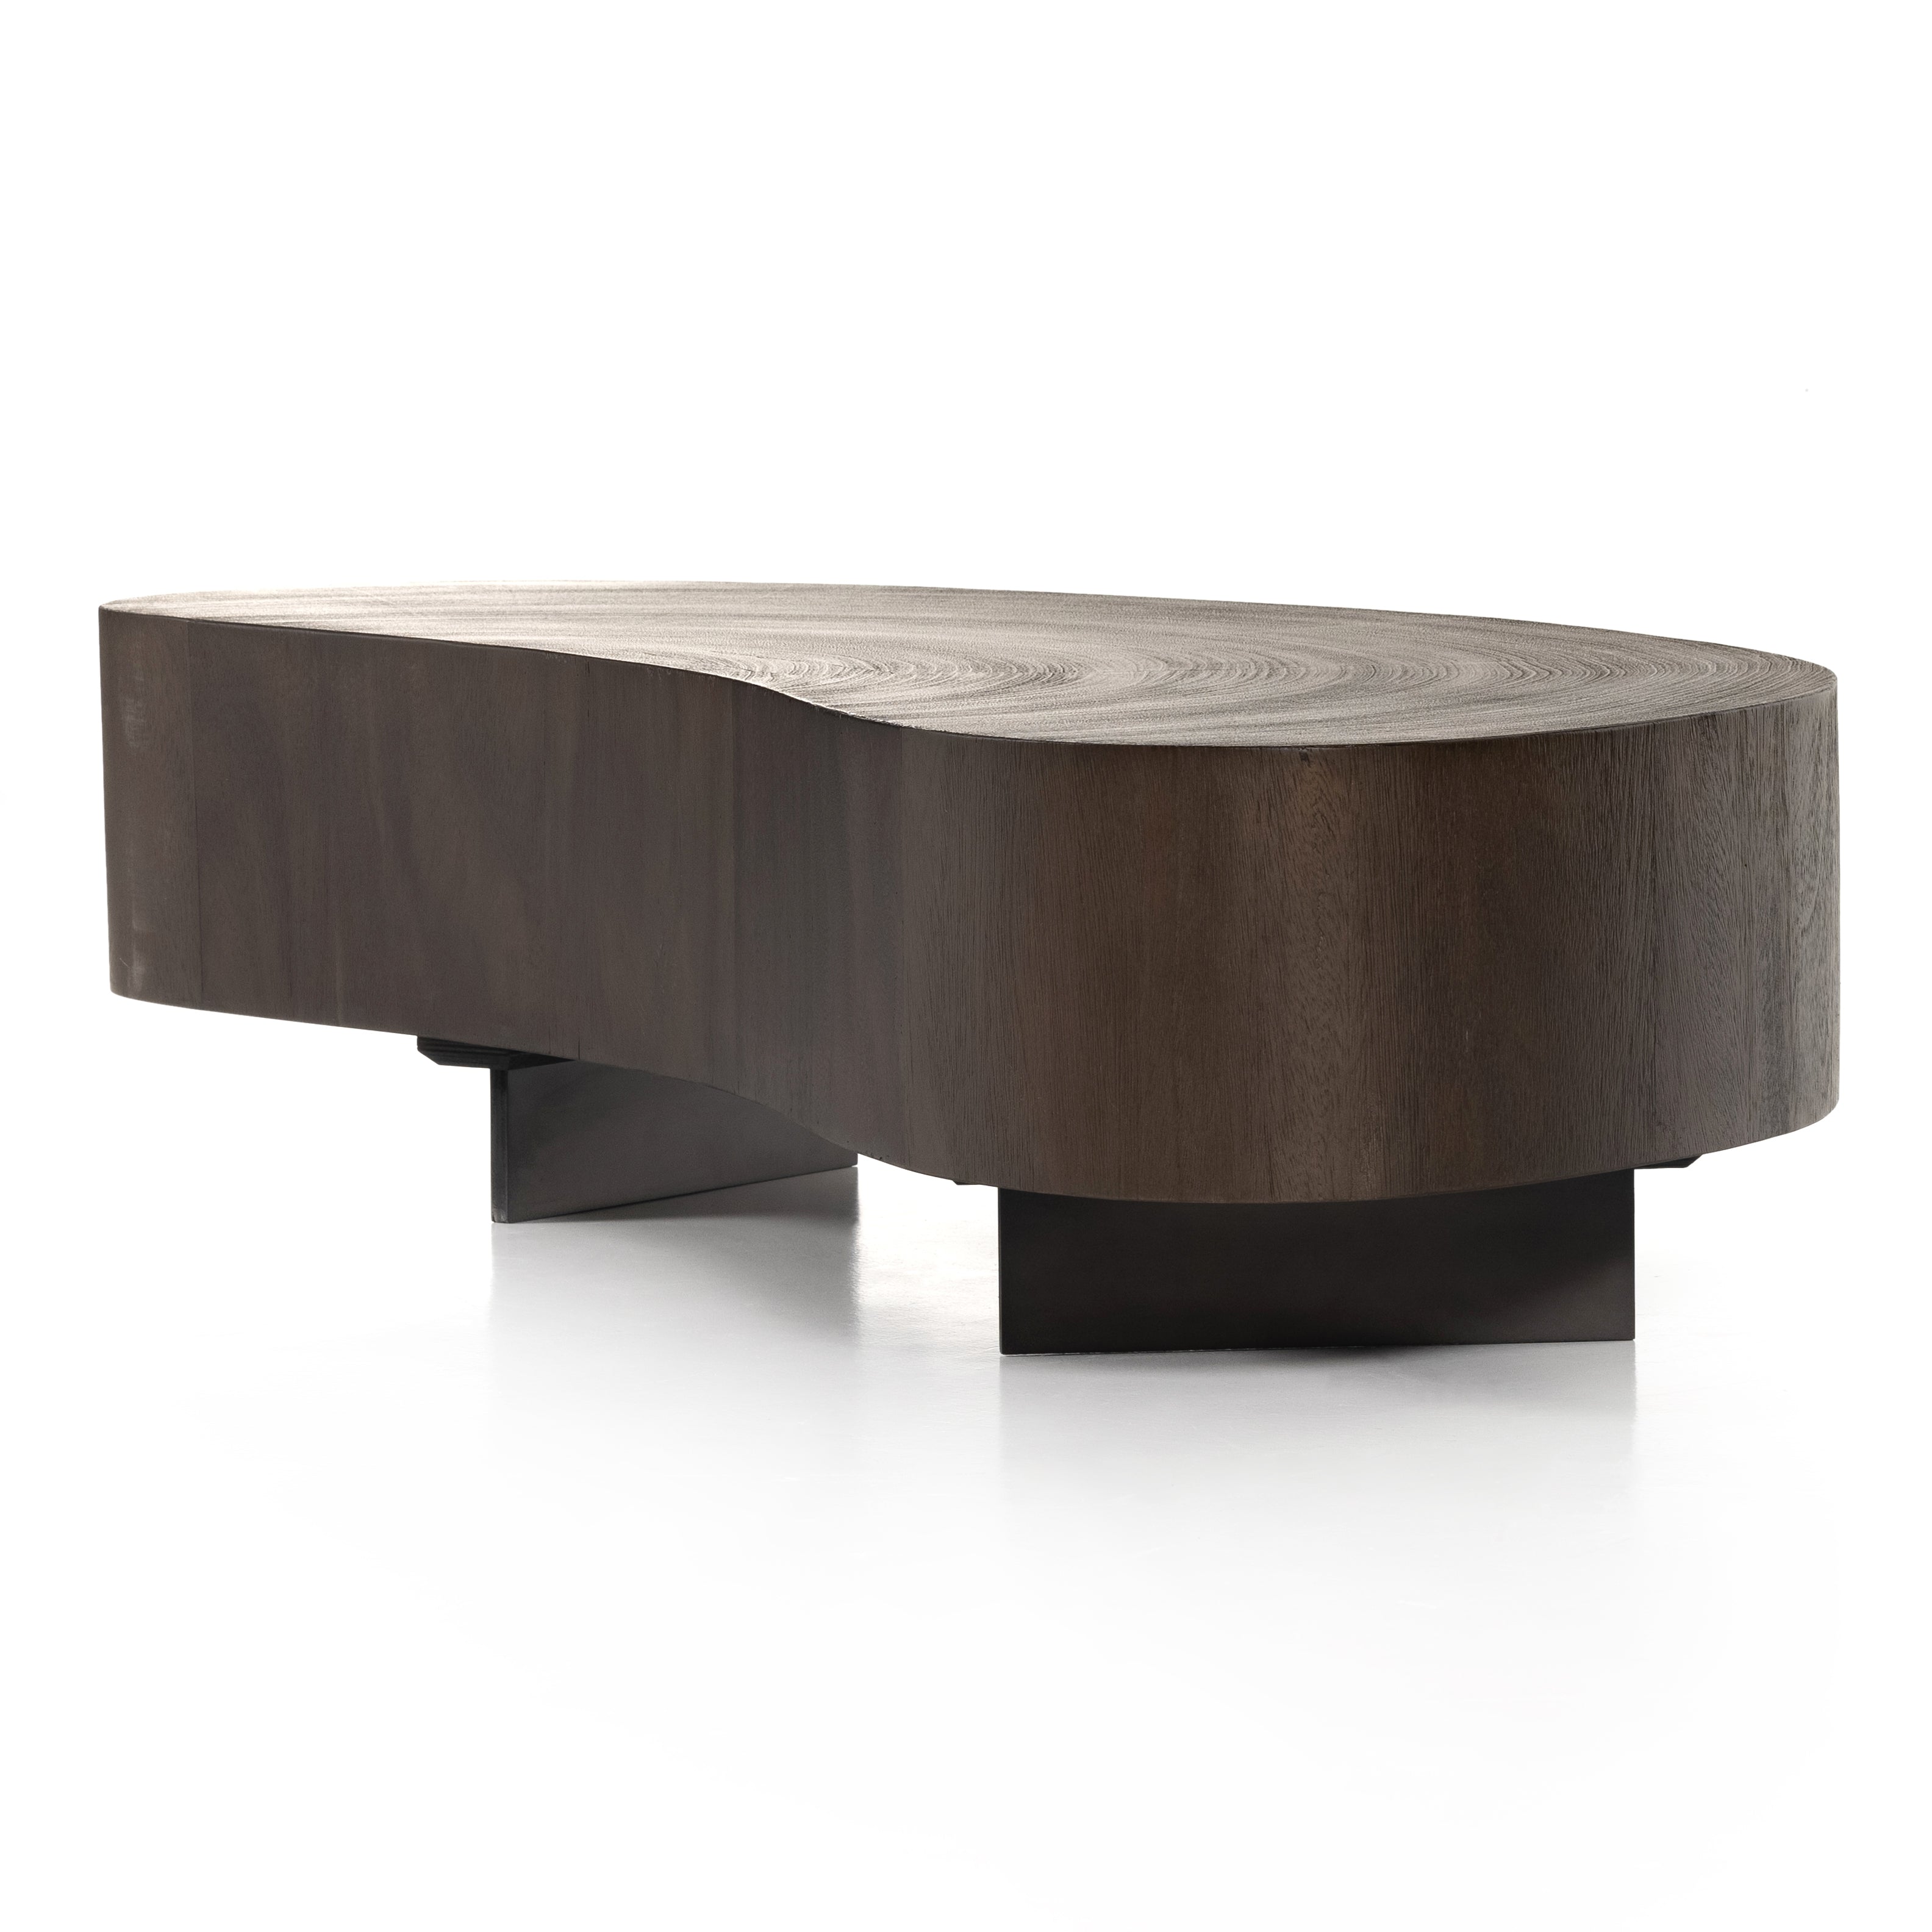 Natural beauty, total novelty. Oyster-cut Guanacaste forms a petite, kidney-shaped coffee table. Visible rings speak to woods' natural graining, while a dark gunmetal-finished base provides clean contrast to the whole look. Option to pair with taller piece, sold separately. Amethyst Home provides interior design, new construction, custom furniture, and area rugs in the Dallas metro area.